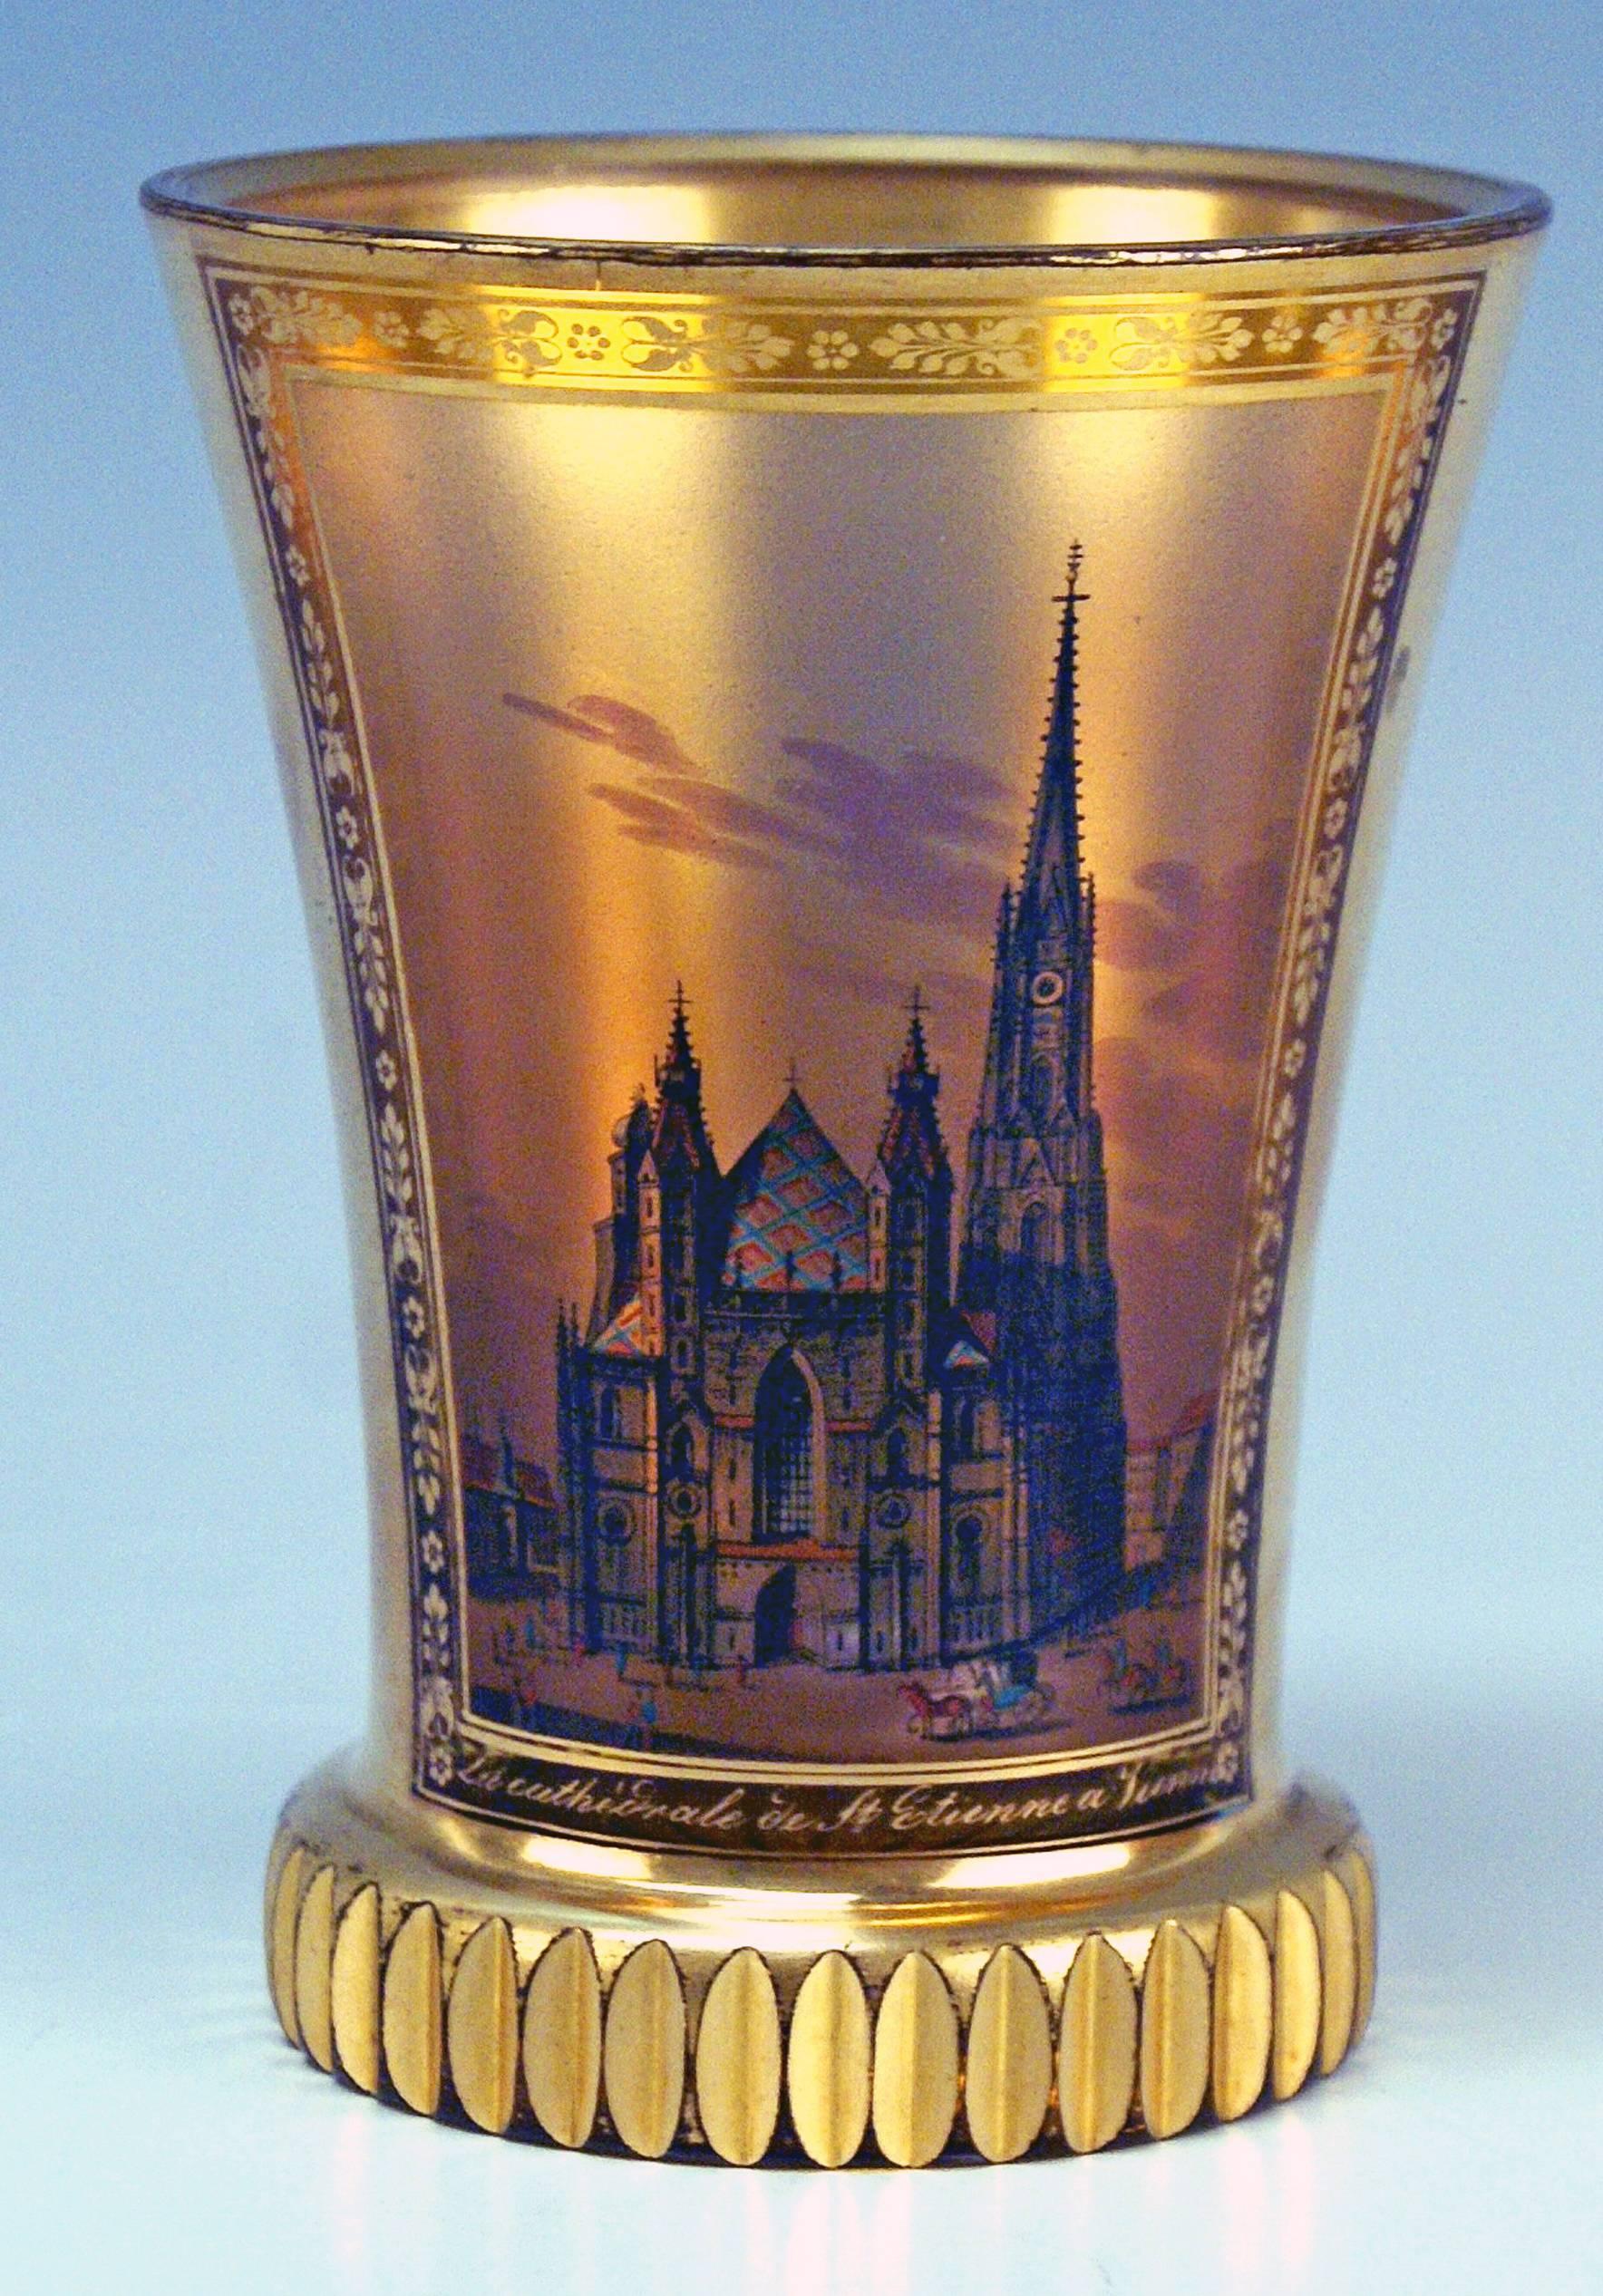 Finest glass beaker / cut-glass of Biedermeier period, with painted view of Cathedral Saint Stephen In Vienna: Picture created by Anton Kothgasser (1769-1851)
made circa 1825 

Specifications:
Stunningly manufactured golden shaded as well as